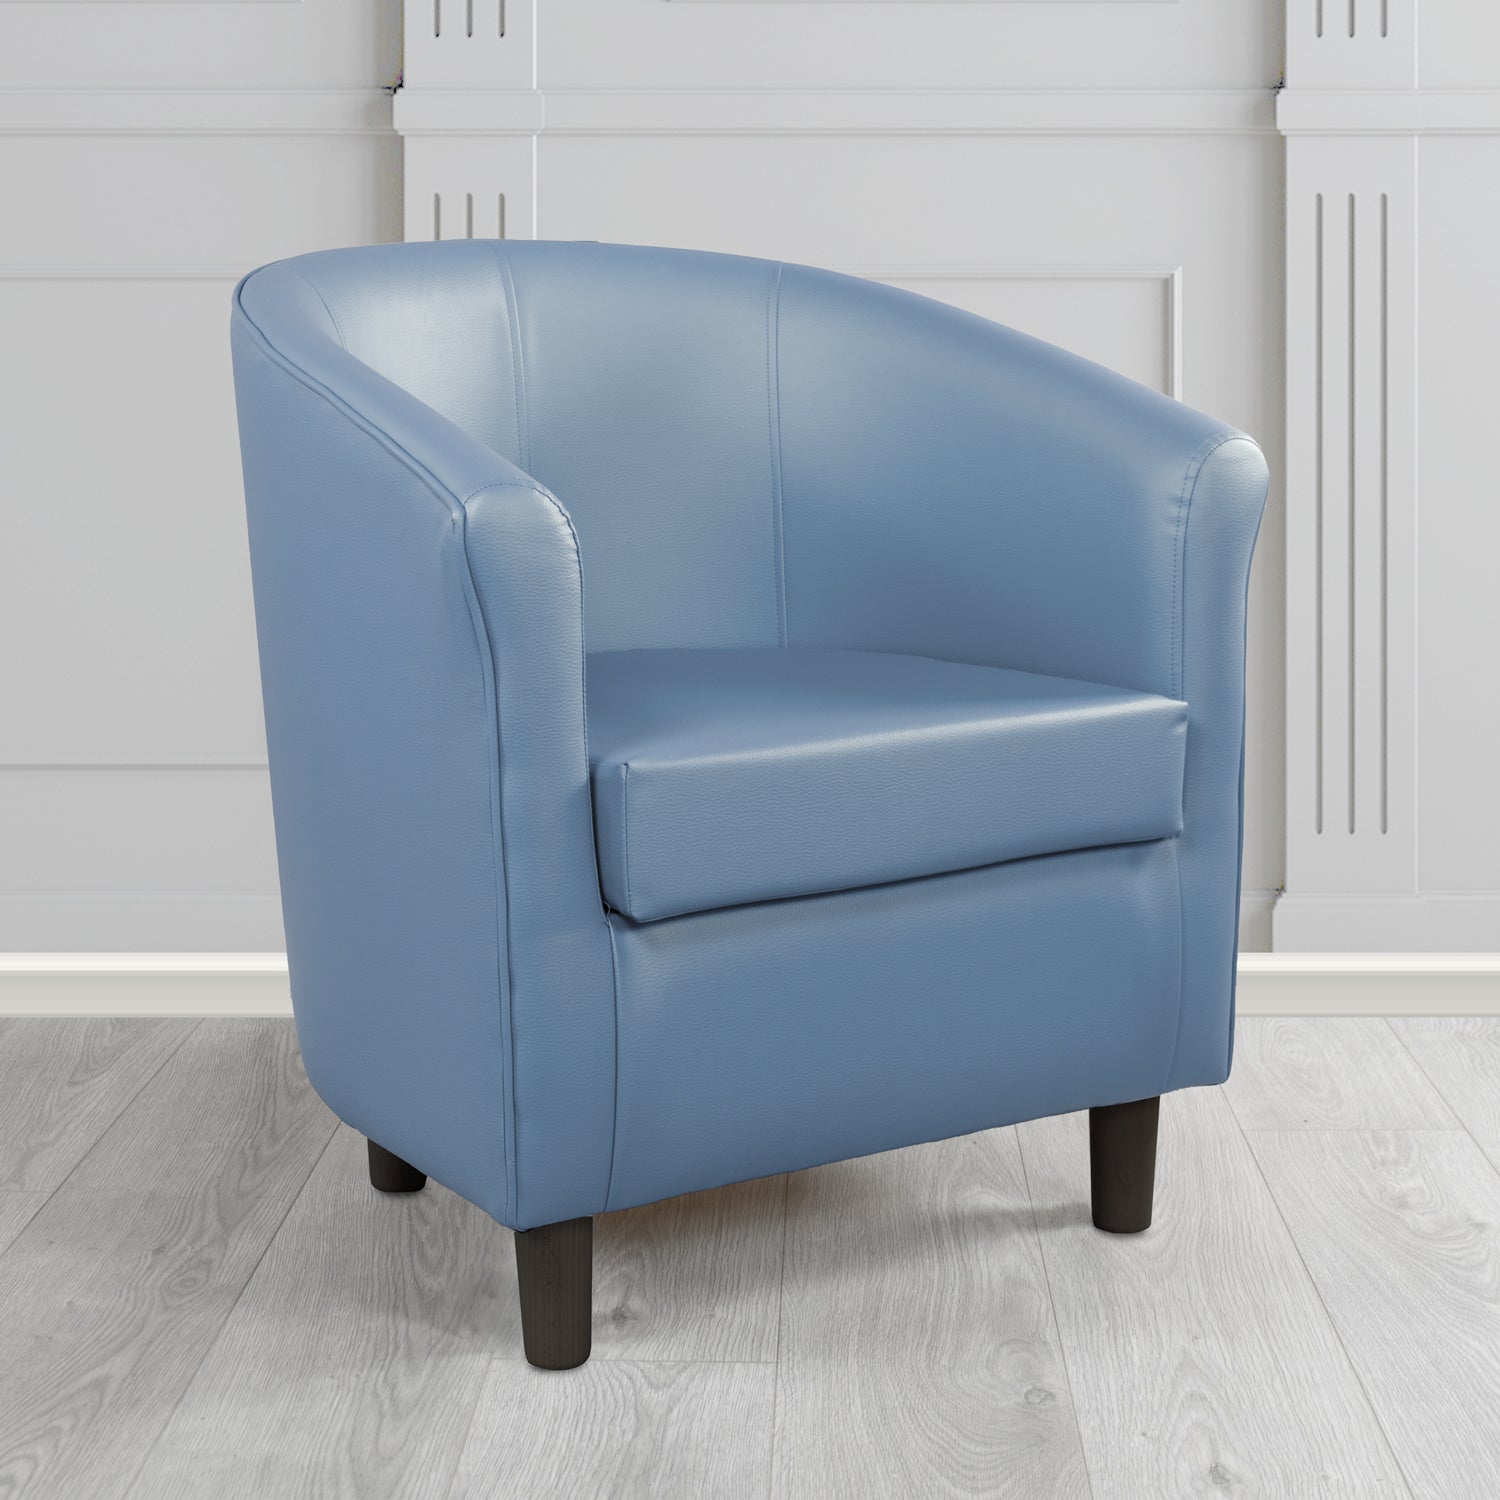 Tuscany Just Colour Dolphin Antimicrobial Crib 5 Contract Faux Leather Tub Chair - The Tub Chair Shop